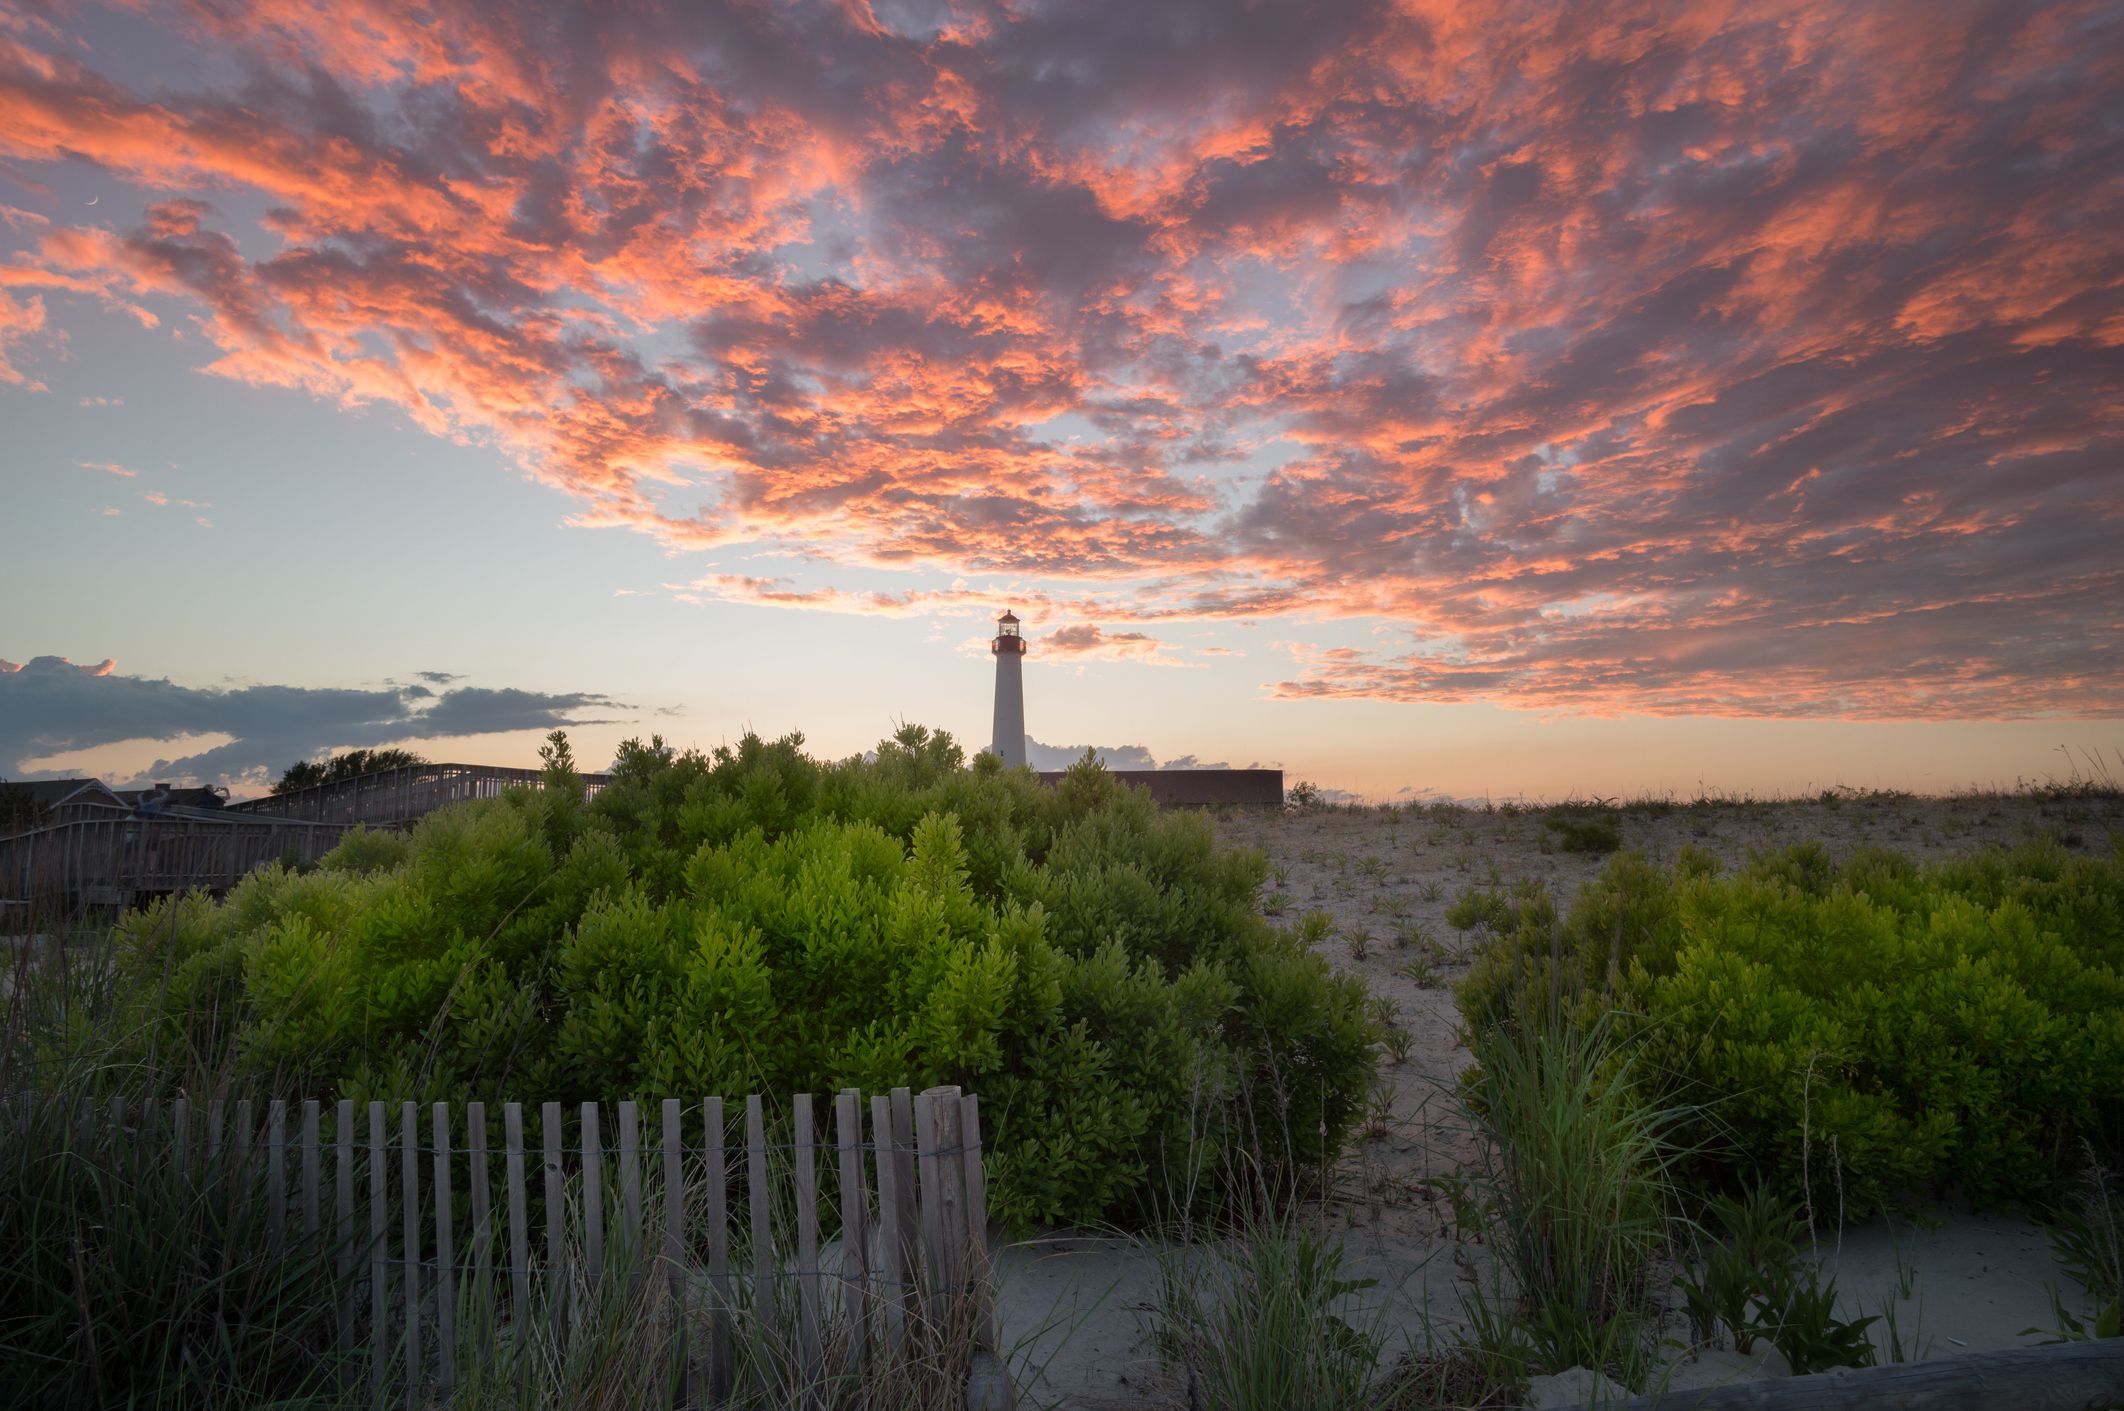 <p>One of the best things about vacations to Cove Beach in Cape May is the lighthouse. The historic structure still lights up the beach to create oceanfront enchantment each evening. It's a charming footnote to a full day of swimming, hunting seashells, and exploring the dunes for the kids. What's more, the entire New Jersey town and seaside resort — located at the end of the Cape May Peninsula — is a National Historic Landmark thanks to its exceptionally well-preserved Victorian buildings, built mainly during the late 19th century. Hotel accommodations in Cape May can get pricey, but with a bit of digging and advance planning, reasonably priced rentals can be found. </p><p><b>Related:</b> <a href="https://blog.cheapism.com/us-lighthouses-14085/">18 Spectacular Lighthouses to See Across America</a></p>